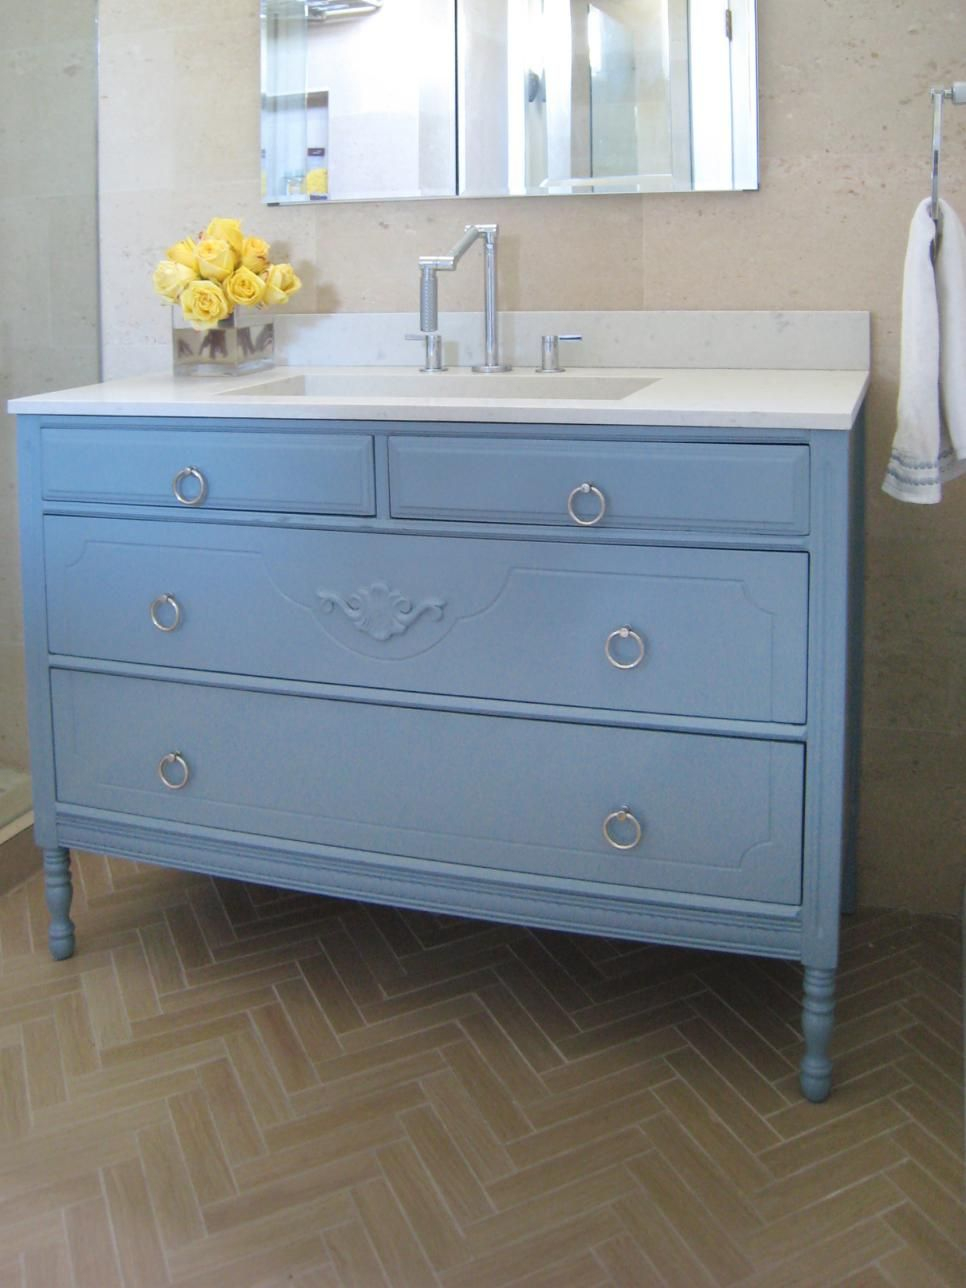 25 Ways To Upcycle Your Old Stuff Repurpose Diy Bathroom Vanity in proportions 966 X 1288